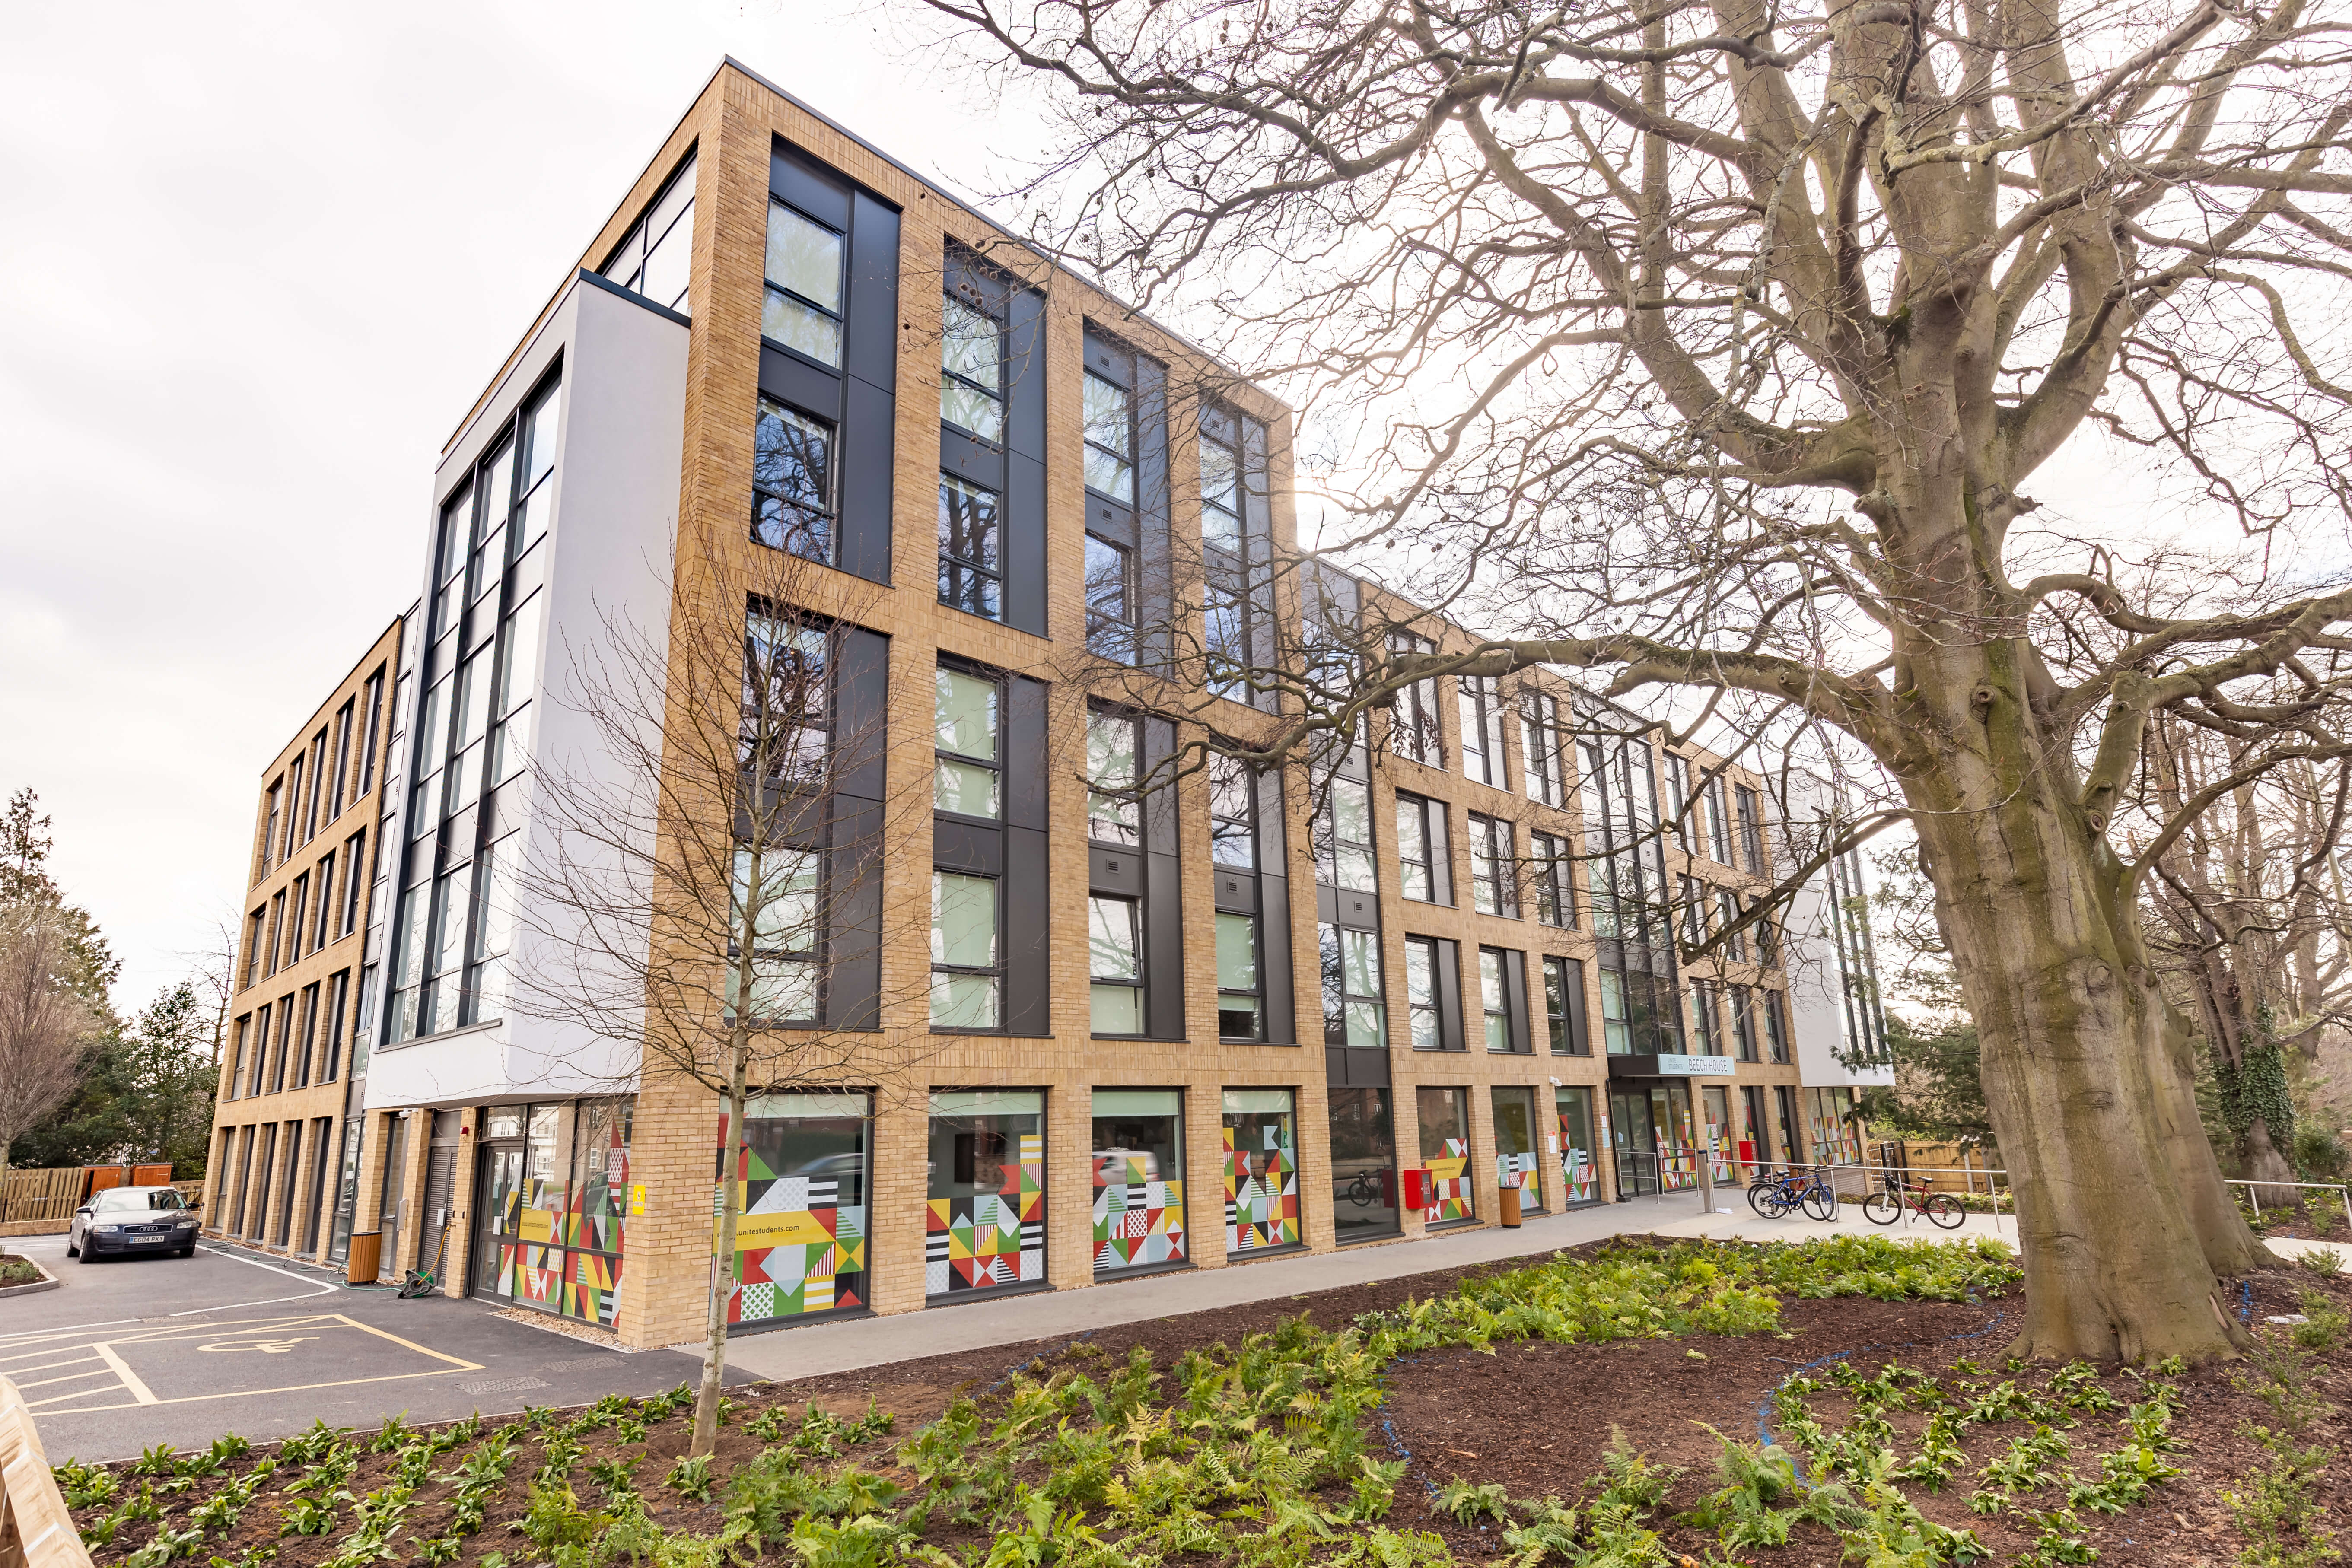 Unite Students accommodation at Beech House in Oxford